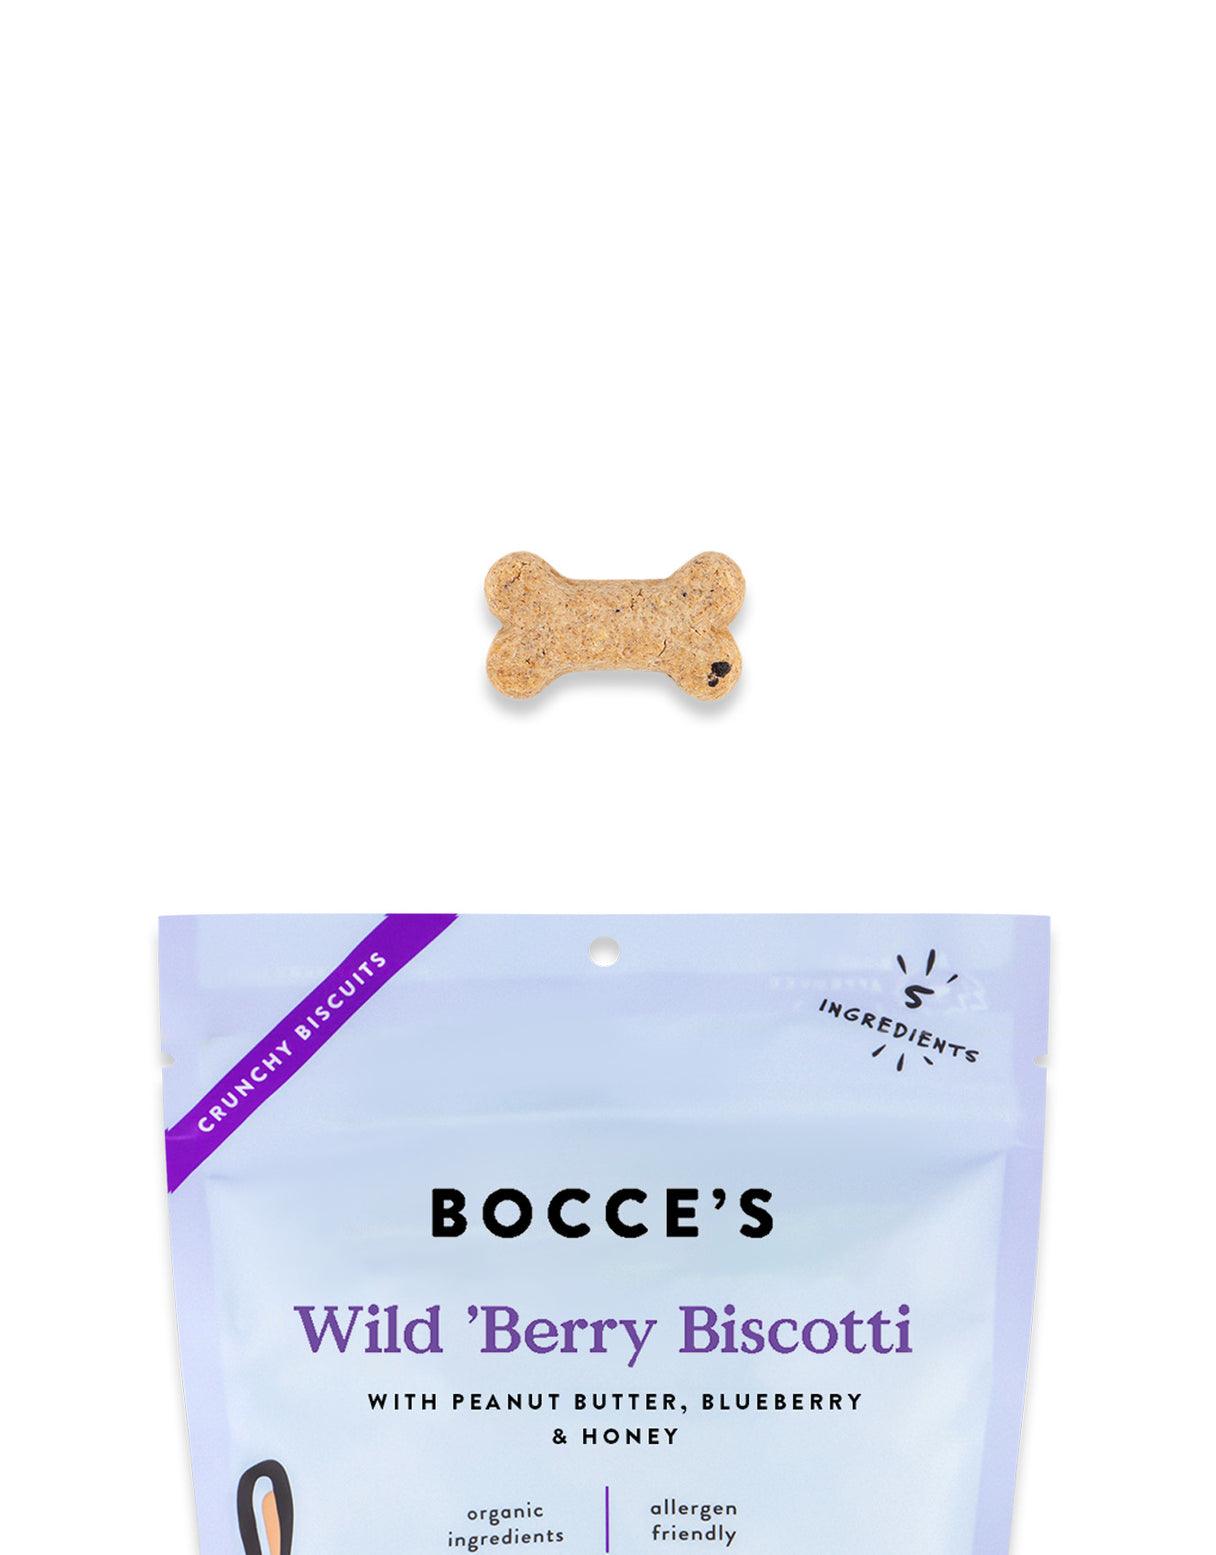 Bocce's Wild 'Berry Biscotti Dog Biscuits, 5oz - Rocky & Maggie's Pet Boutique and Salon